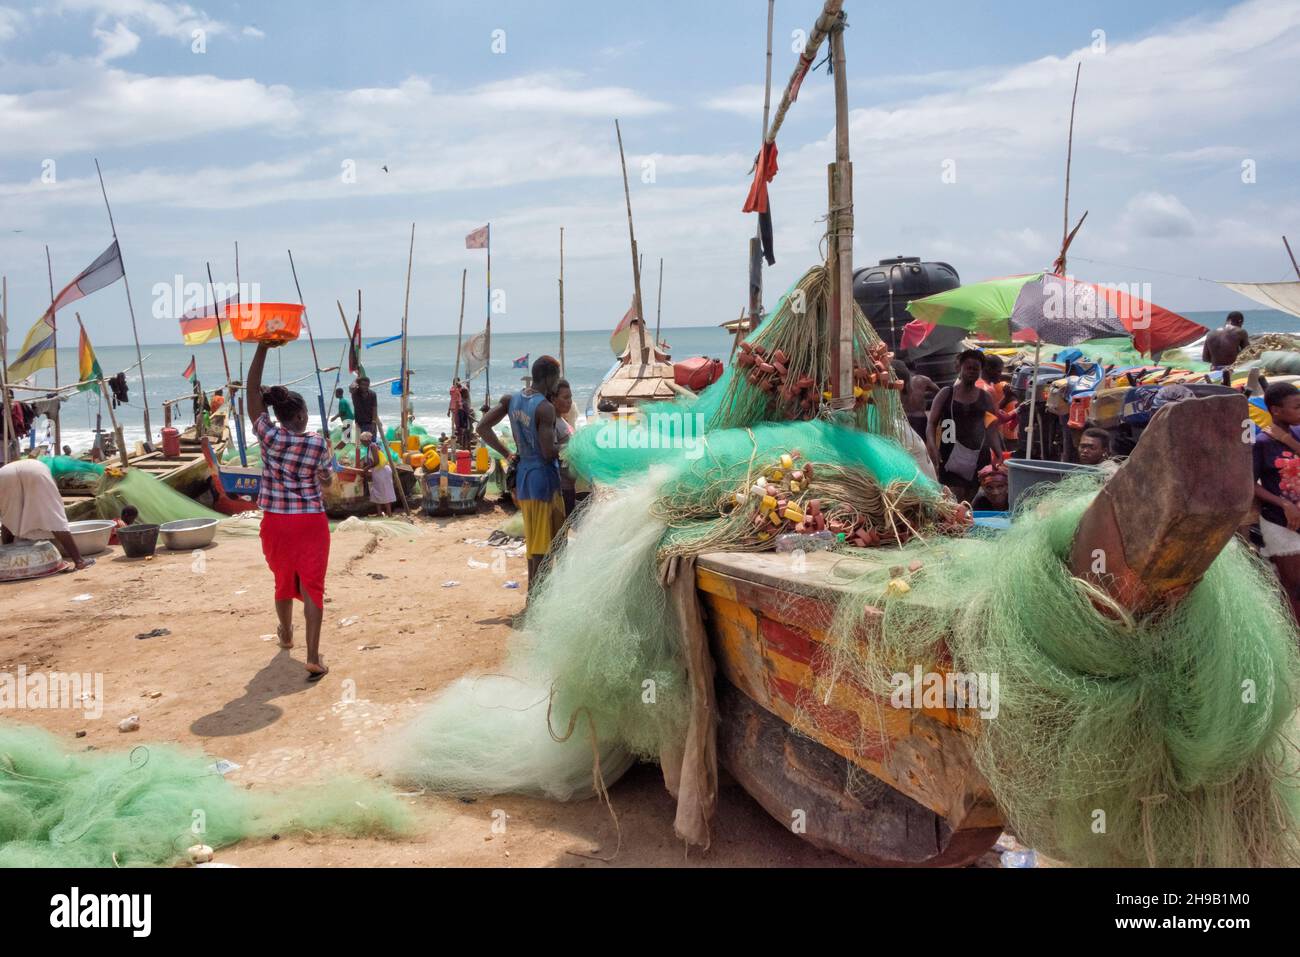 Colorful fishing boats in the harbor, Cape Coast, Central Region, Ghana Stock Photo